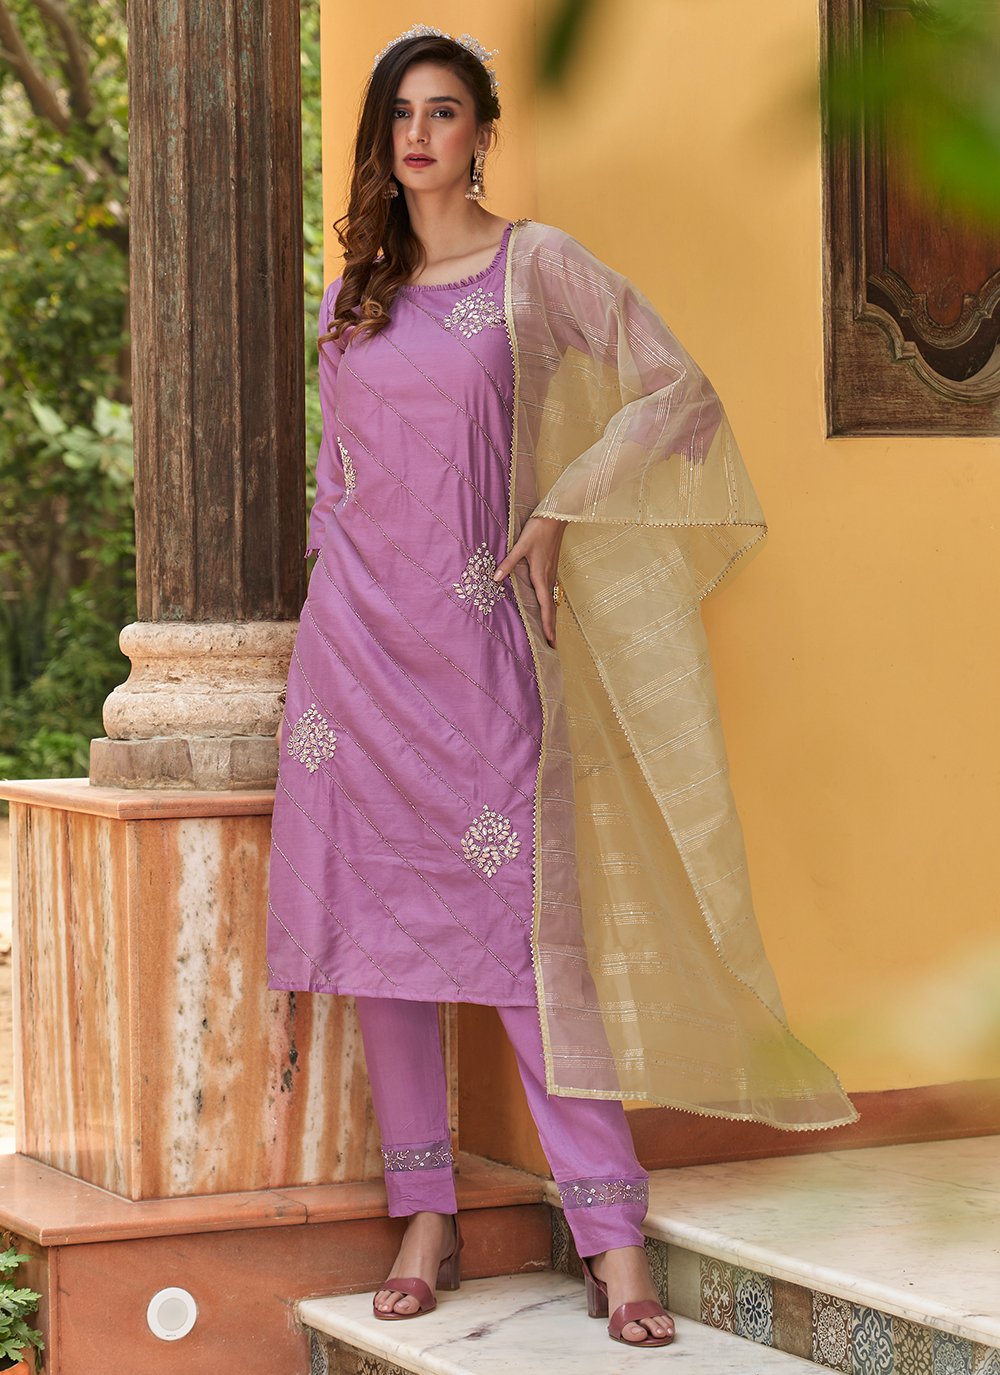 Buy B3Fashion Chanderi Silk Pink Salwar suit with self colour full body  embroidery with contrast floral embroidery work in purple and green colour  and croatian lace. Bottom purple cotton & printed georgette